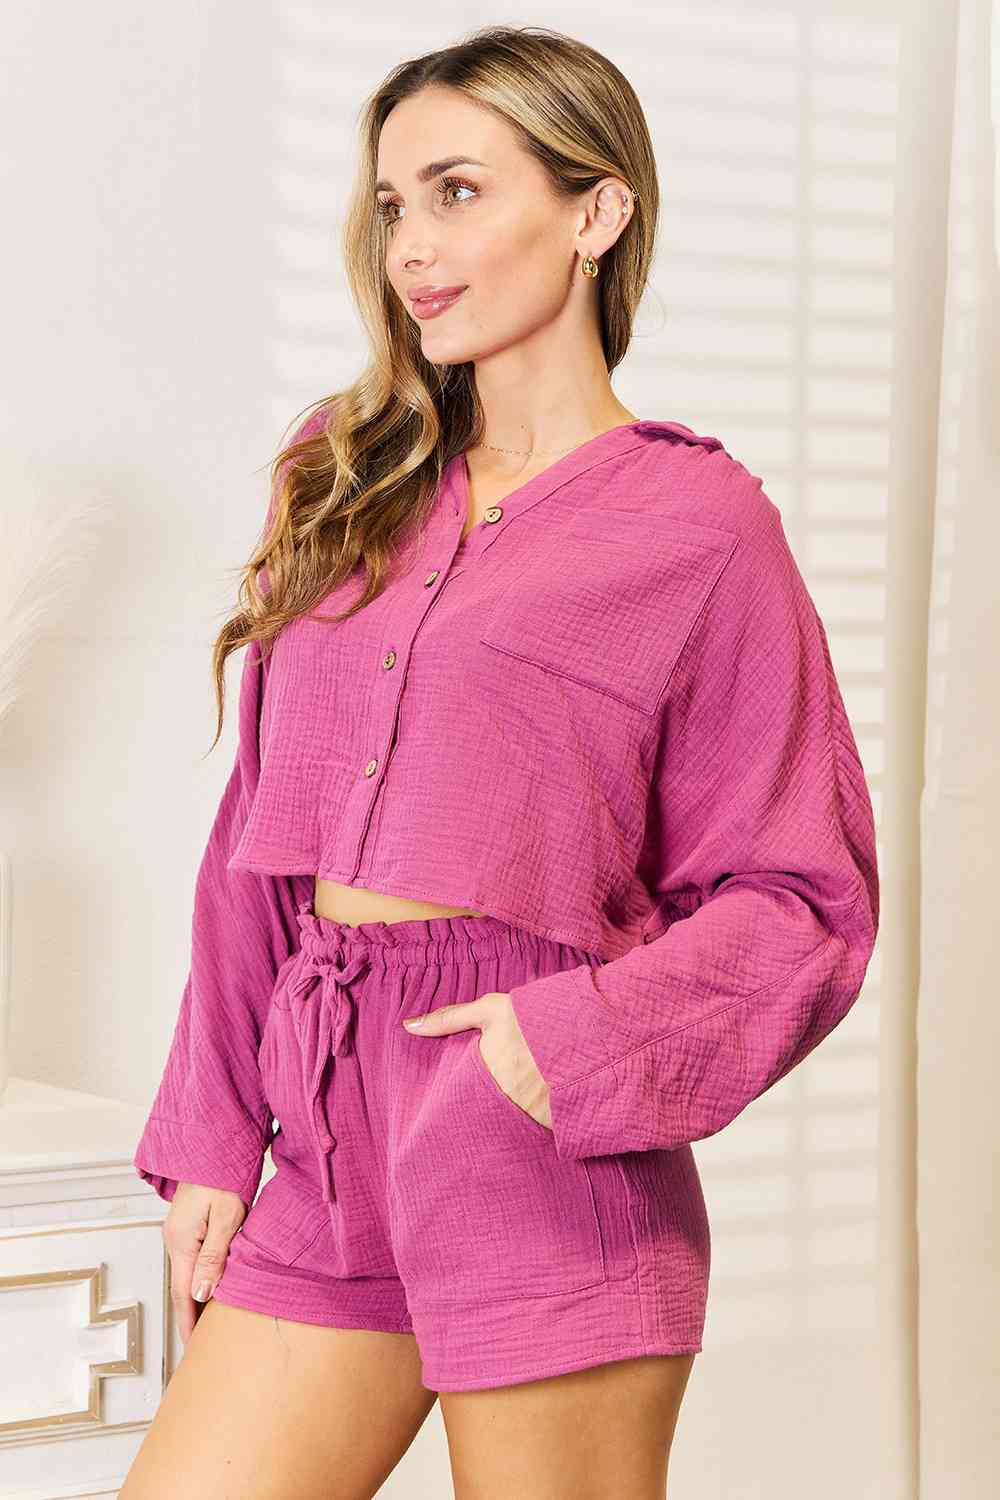 Buttoned Long Sleeve Top and Shorts Set - Camis & Tops - Outfit Sets - 3 - 2024